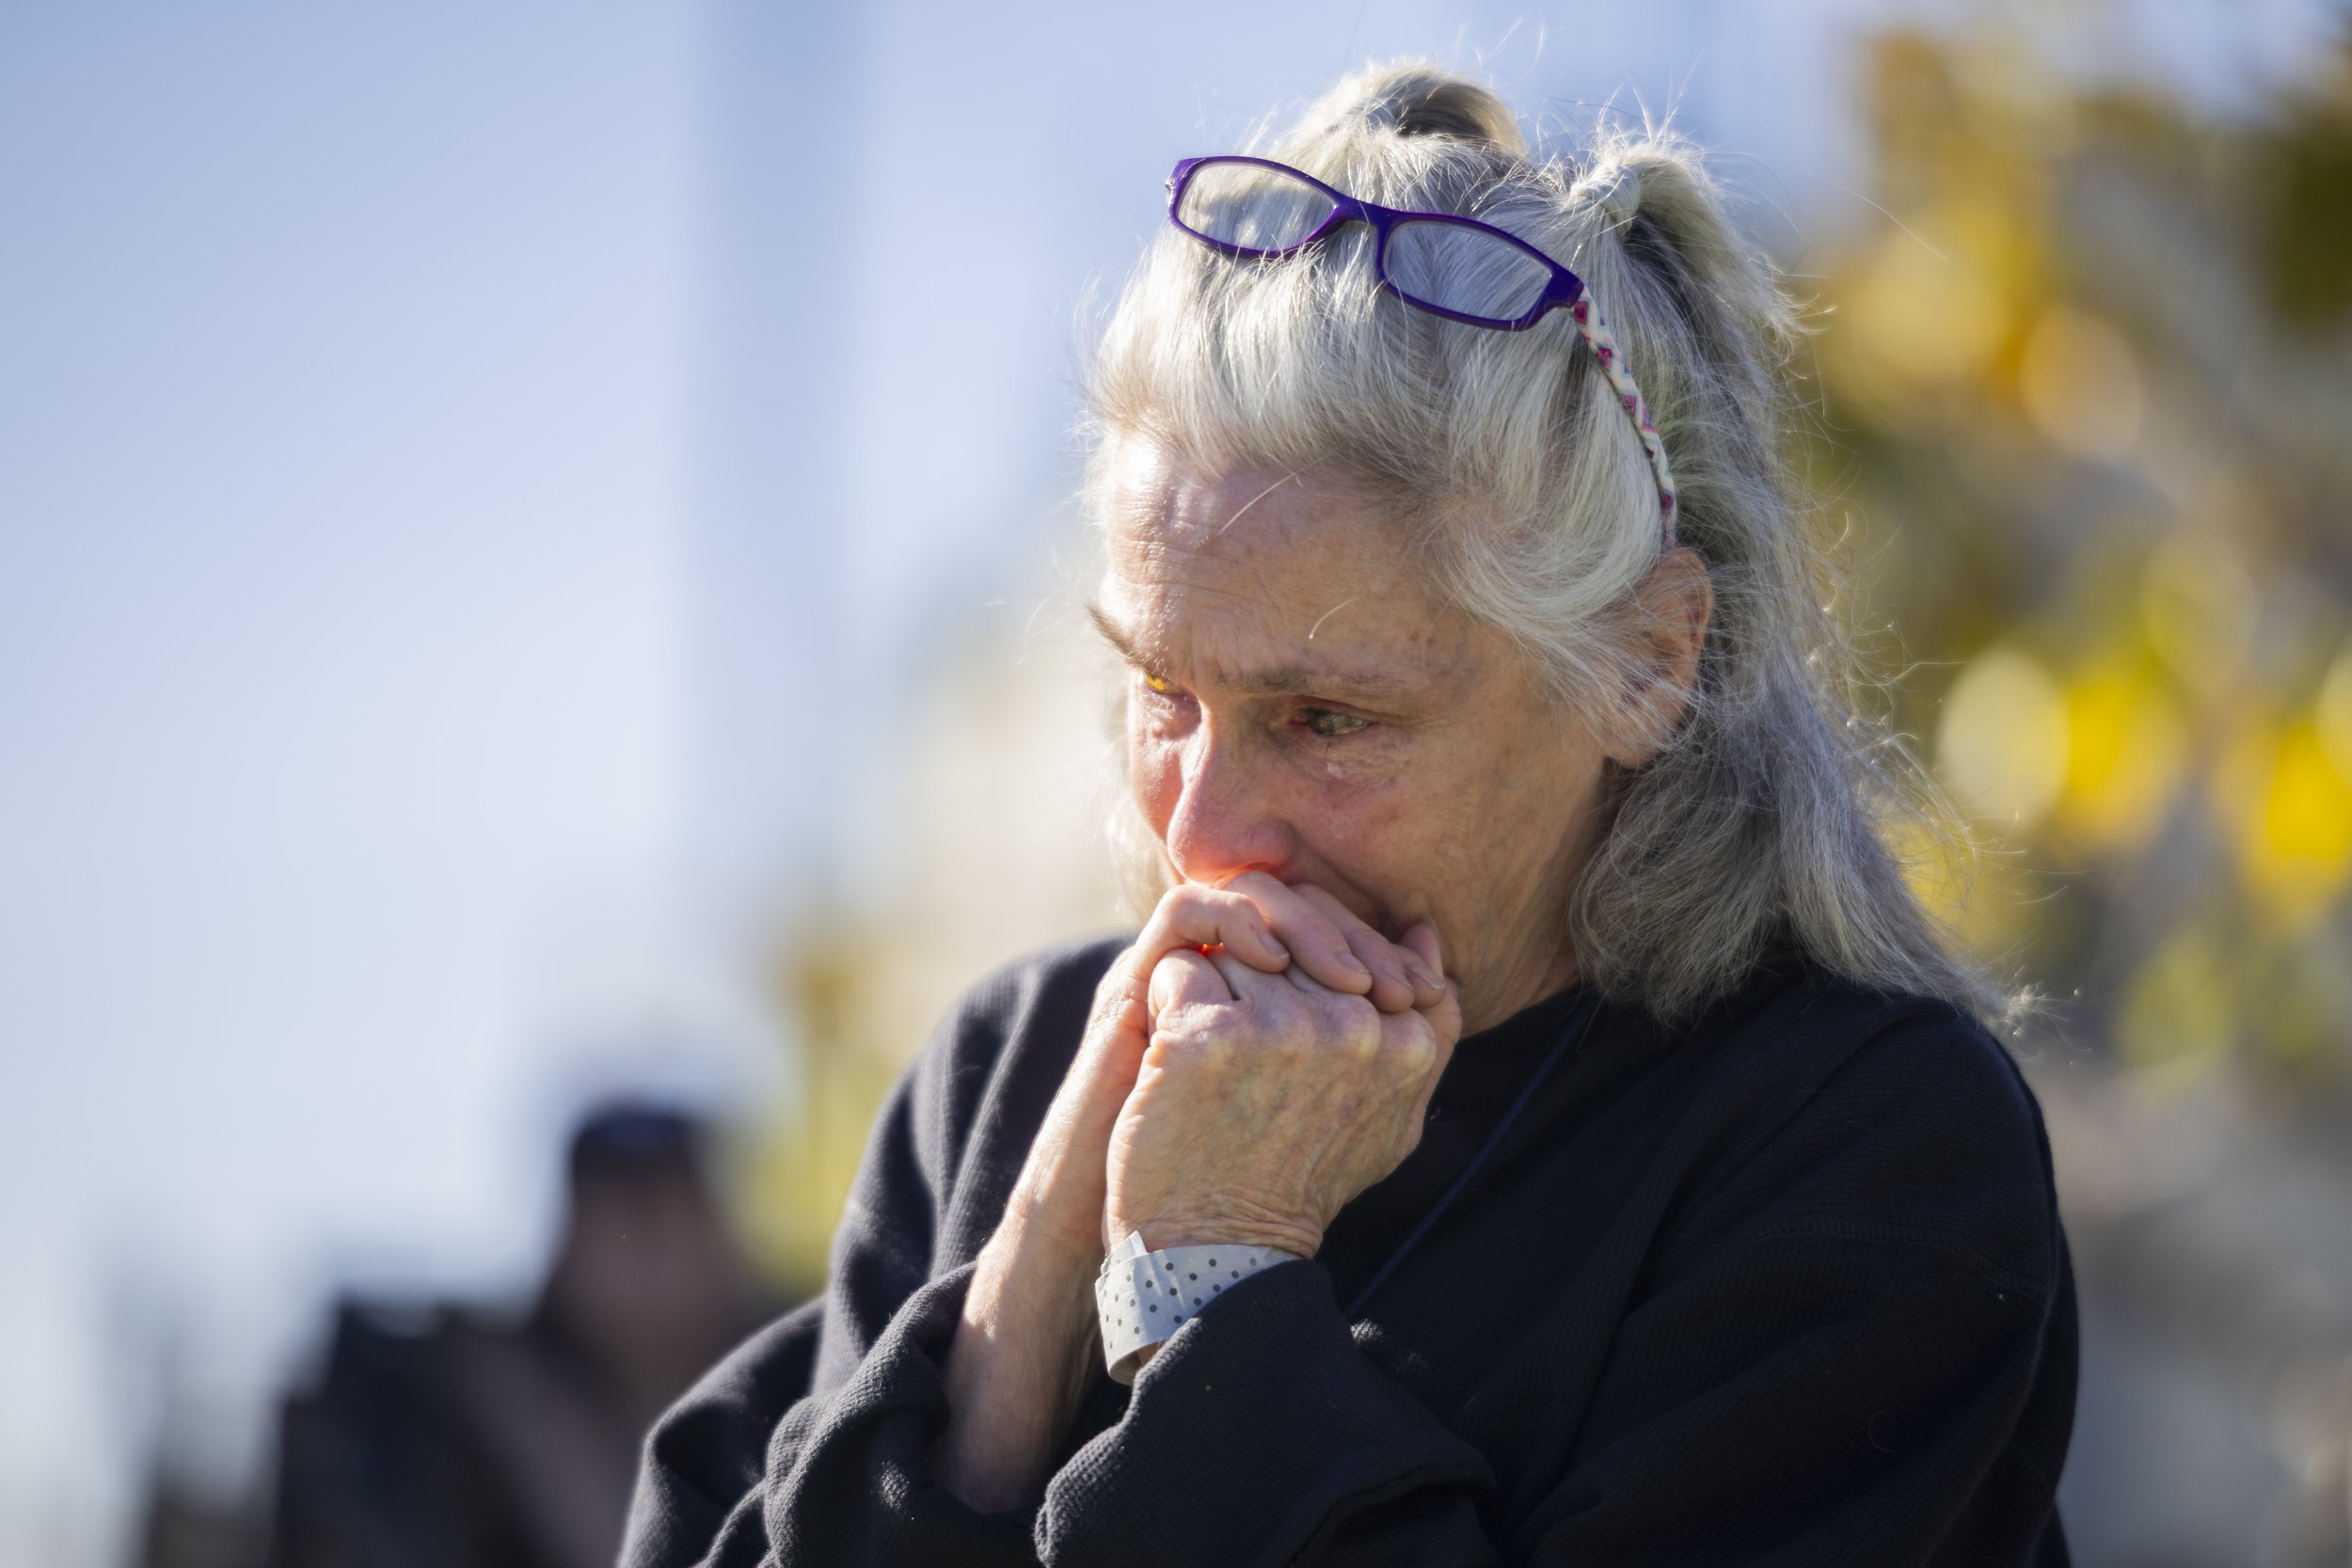  A women cries during the LA County Ceremony of the Unclaimed Dead after placing a white rose on the grave marking the 1,937 individuals who died in 2020 and either did not have next of kin, or were not claimed by their next of kin at the LA County C